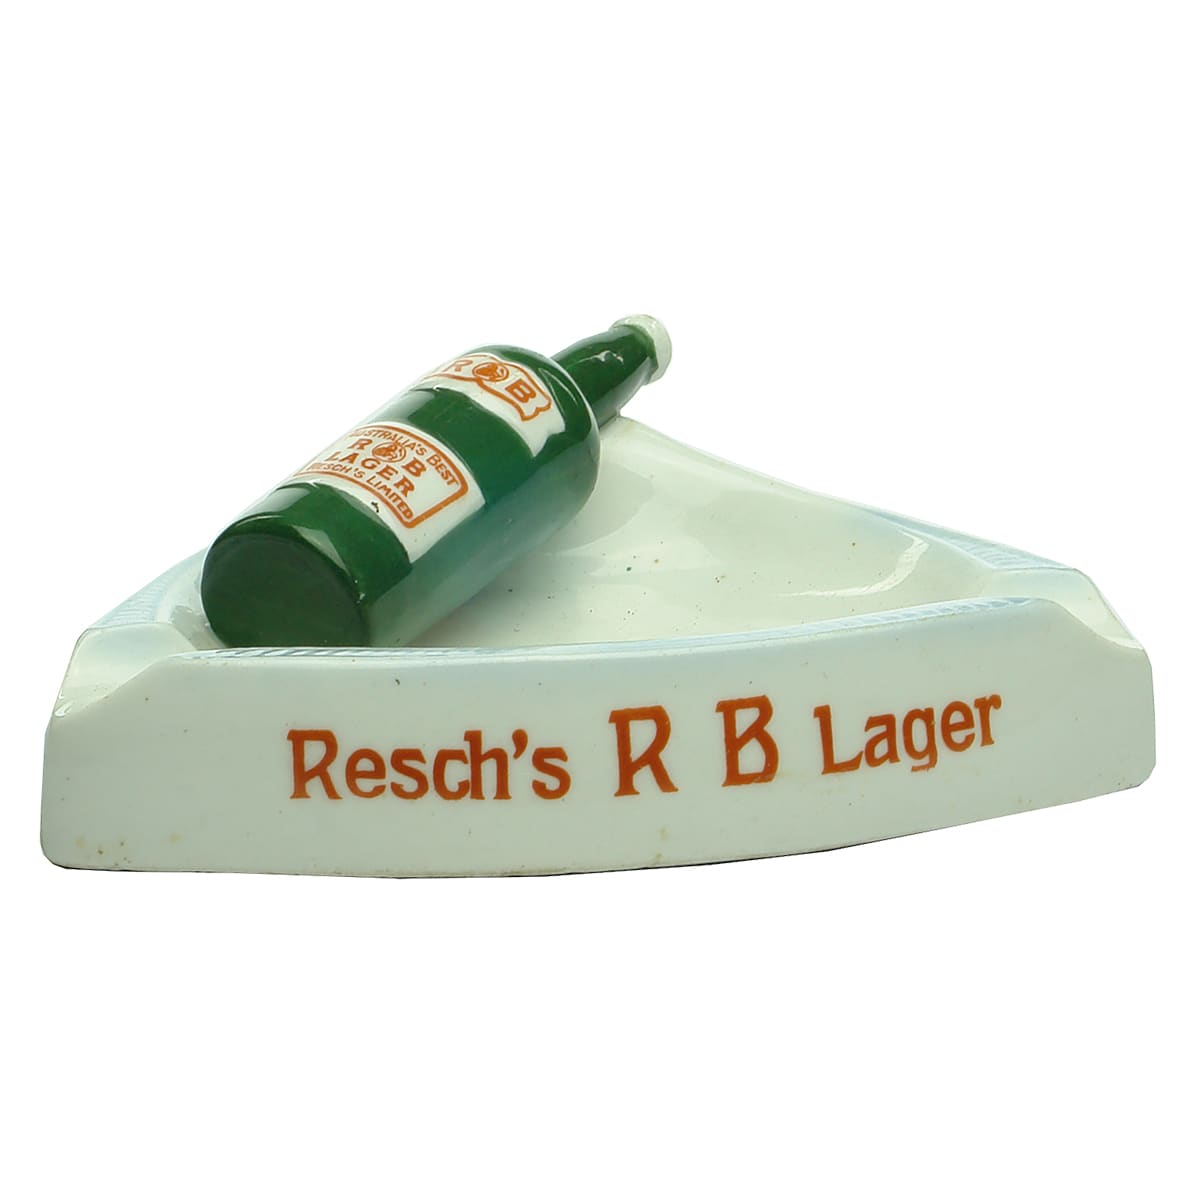 Advertising Ash Tray. Resch's RB Lager, Resch's DA Dinner Ale, Resch's Bitter Ale. (Red Print to bottle label) (New South Wales)